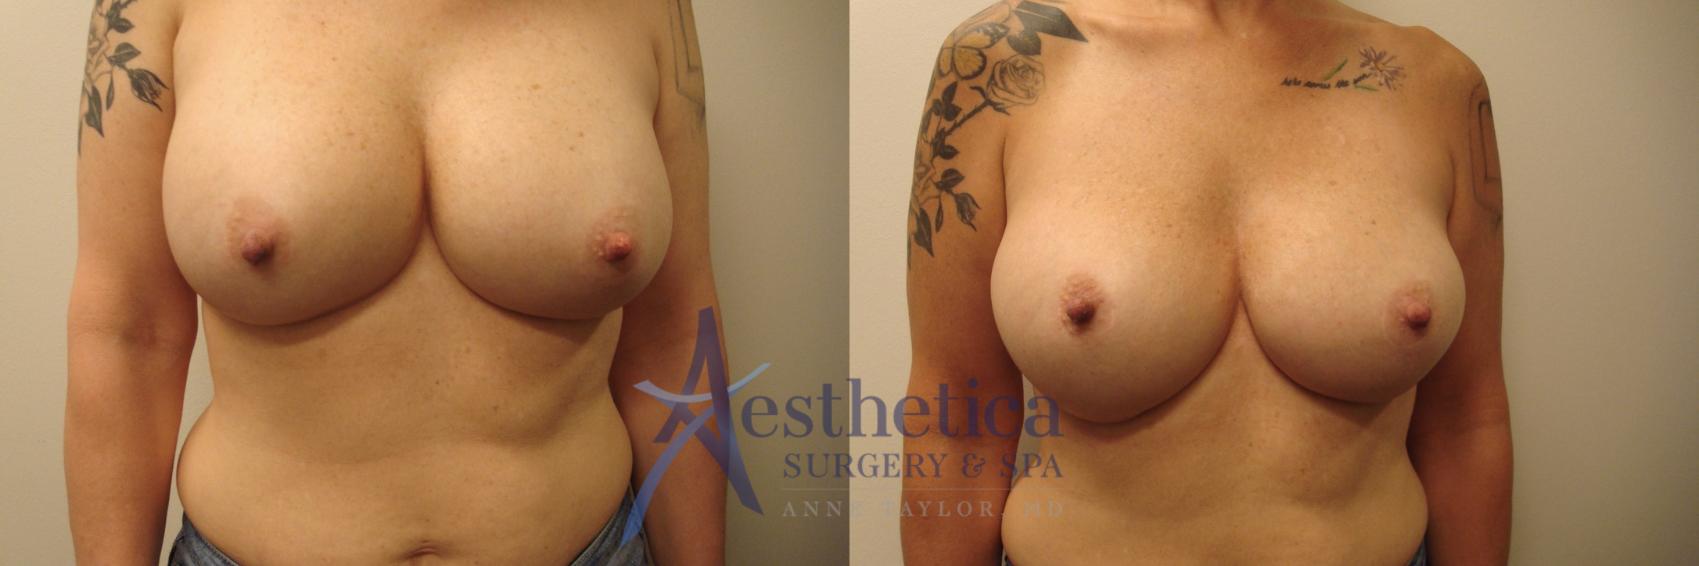 Breast Augmentation Revision Case 633 Before & After Front | Worthington, OH | Aesthetica Surgery & Spa